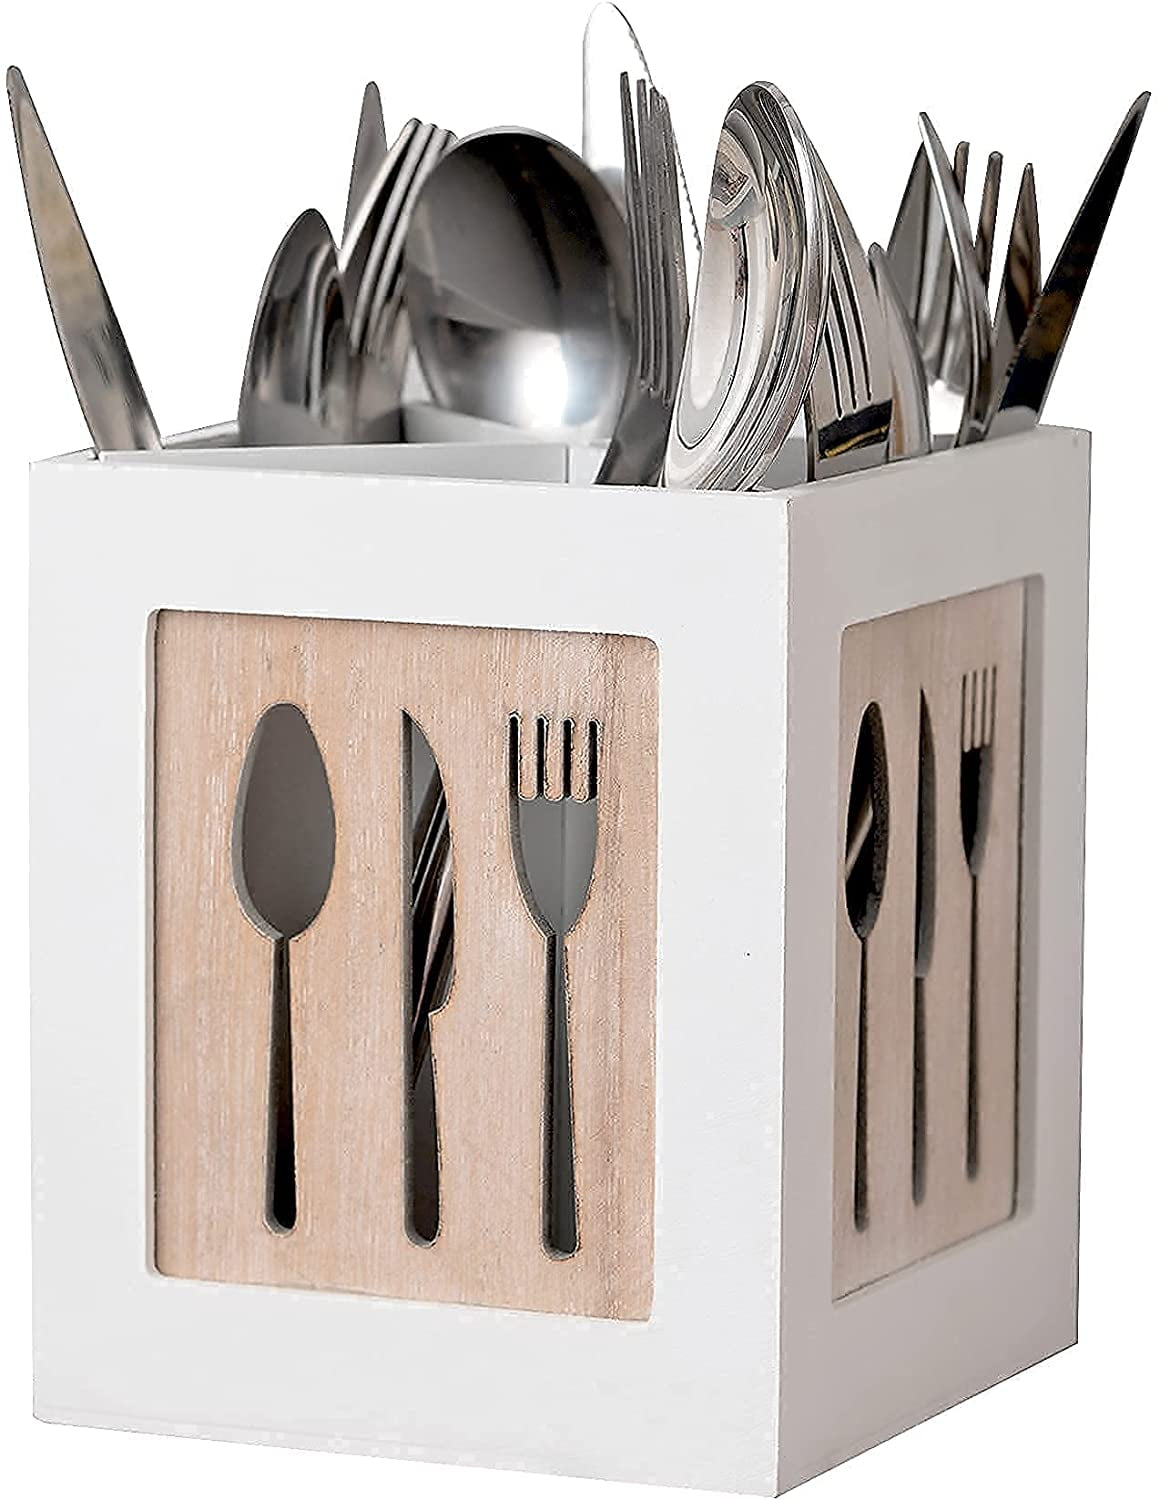 Flatware Organizer Caddy with Wood Base SUS304 Stainless Steel Cutlery Utensil Holder for Kitchen Countertop 2-Piece 